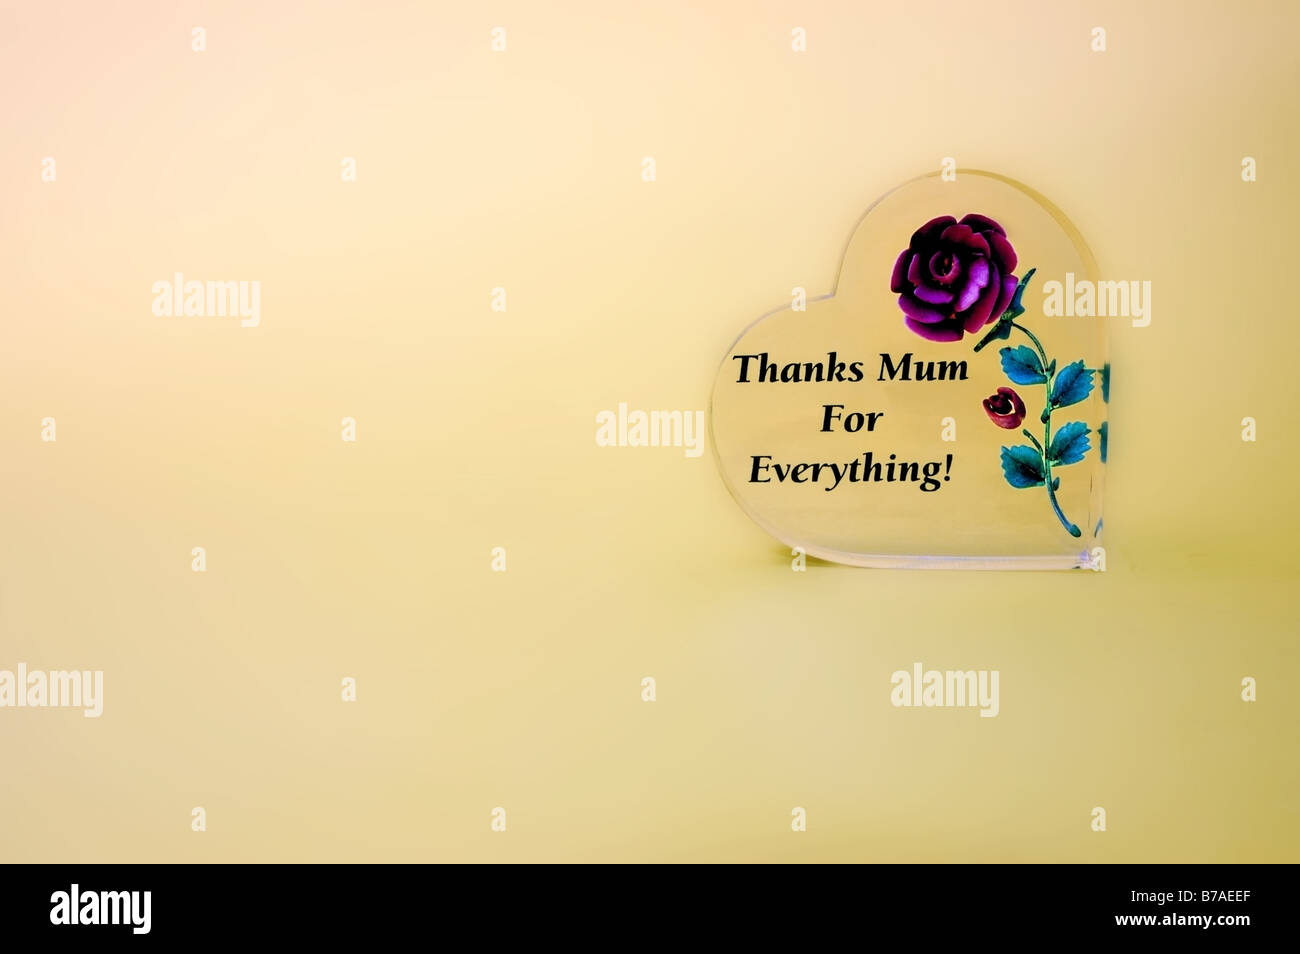 Heart shaped object showing a message to mother with a red rose on mothers day. Stock Photo